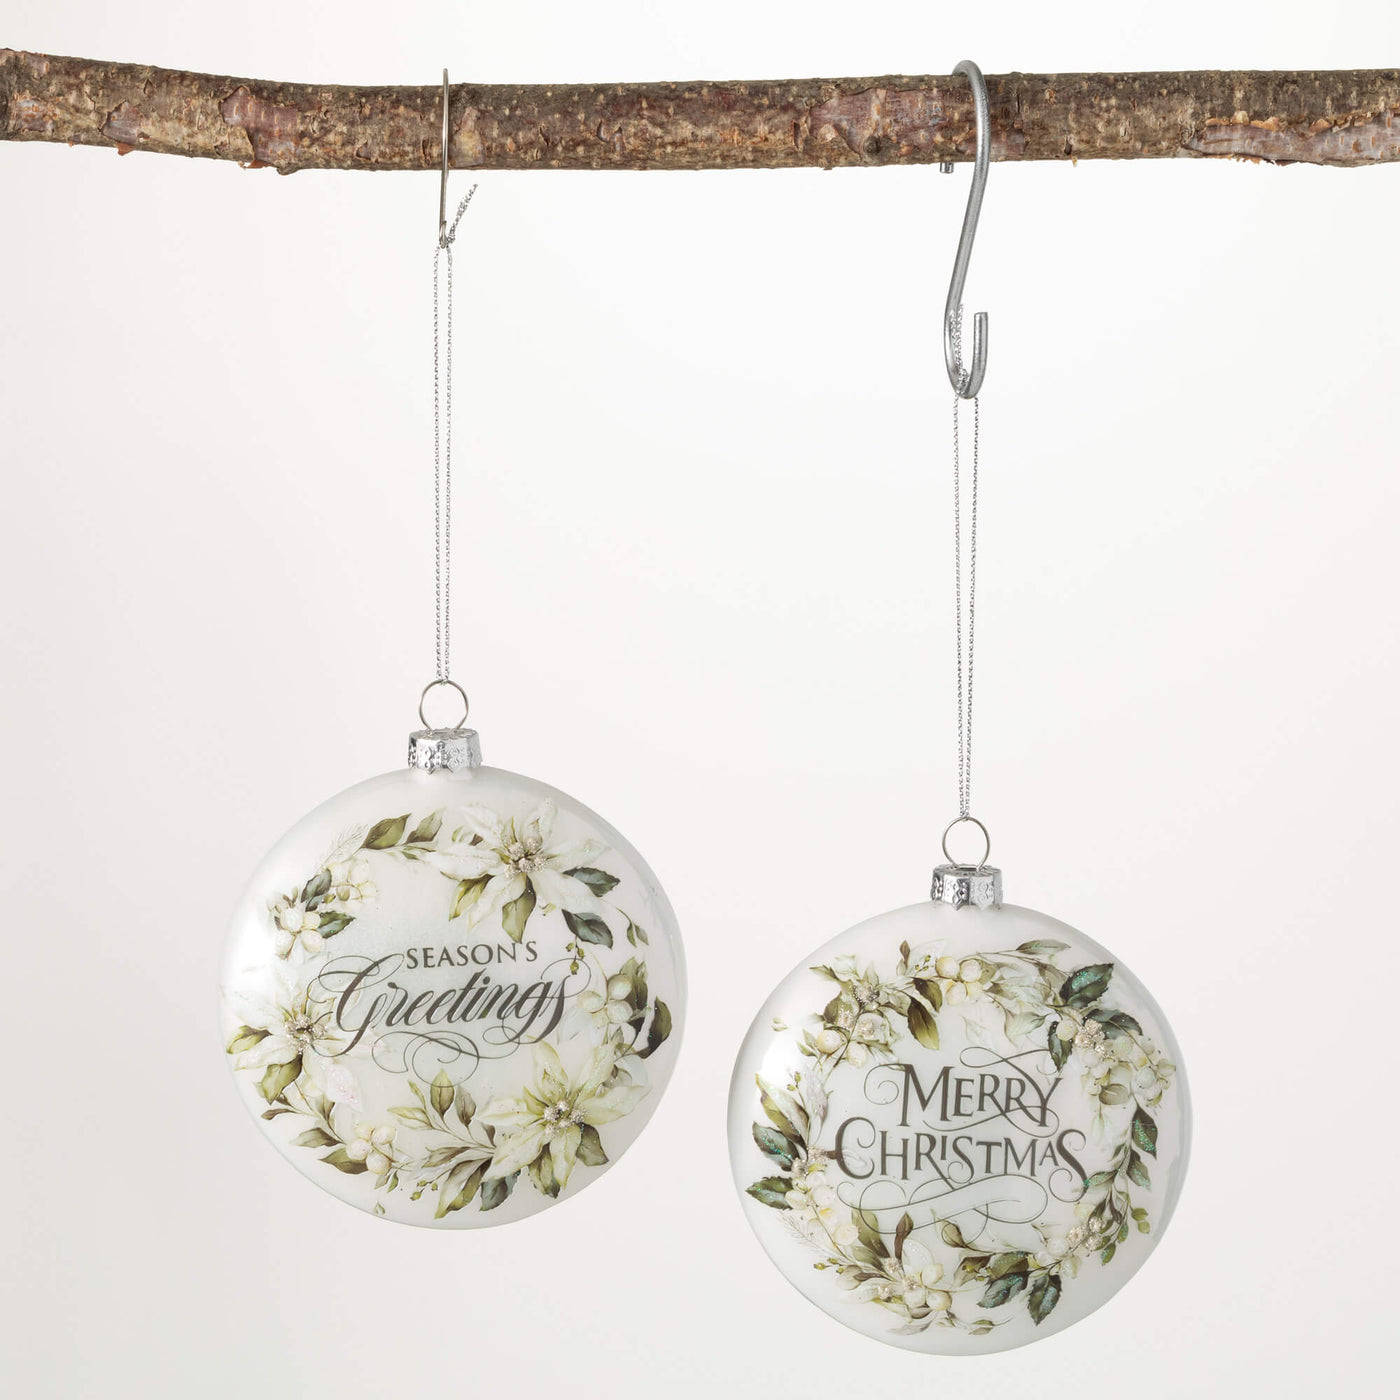 Welcome in the holiday season with these cheerful, wintery white poinsettia garden themed ornaments. Available in Season’s Greetings or Merry Christmas at Davis Porch and Patio Weatherford Texas 